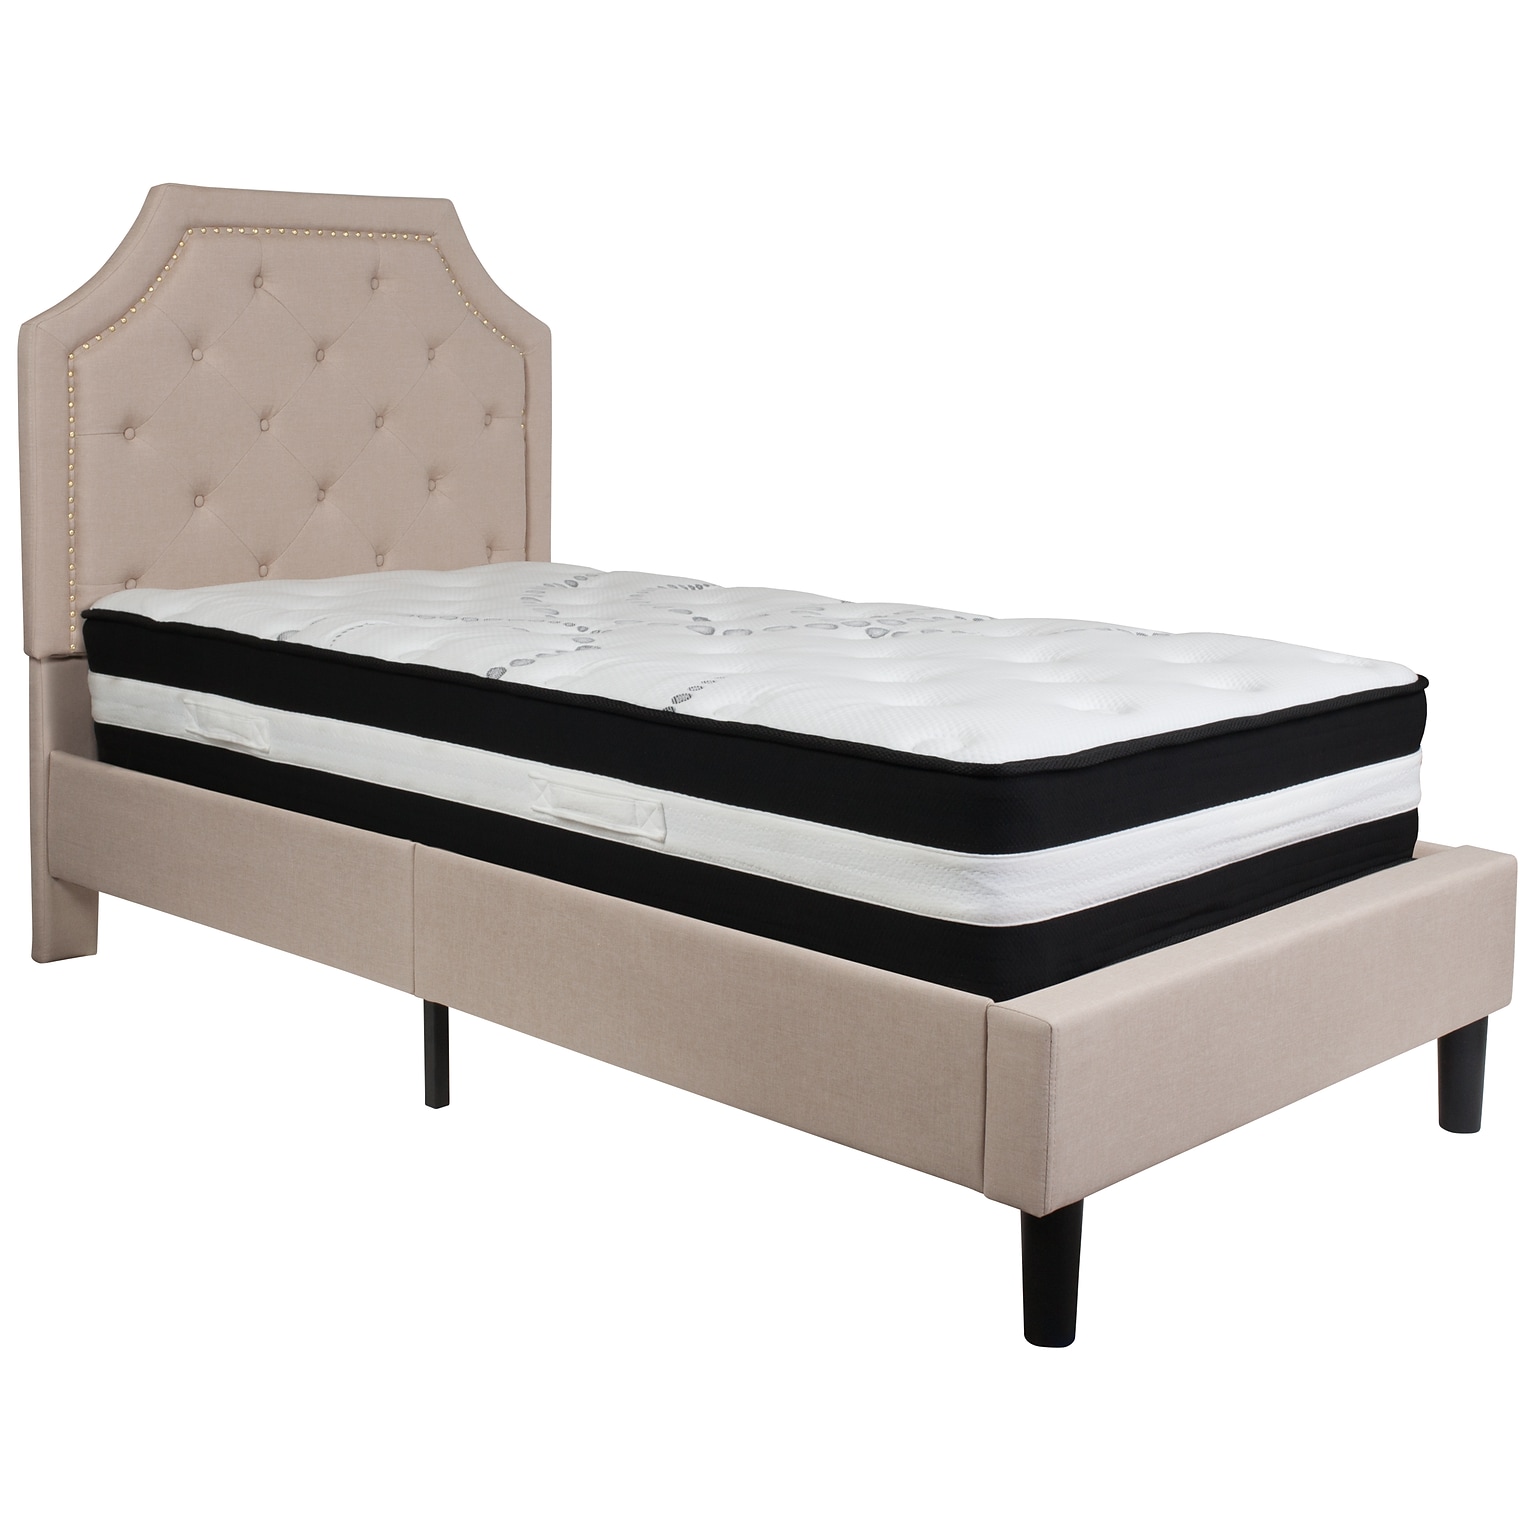 Flash Furniture Brighton Tufted Upholstered Platform Bed in Beige Fabric with Pocket Spring Mattress, Twin (SLBM1)